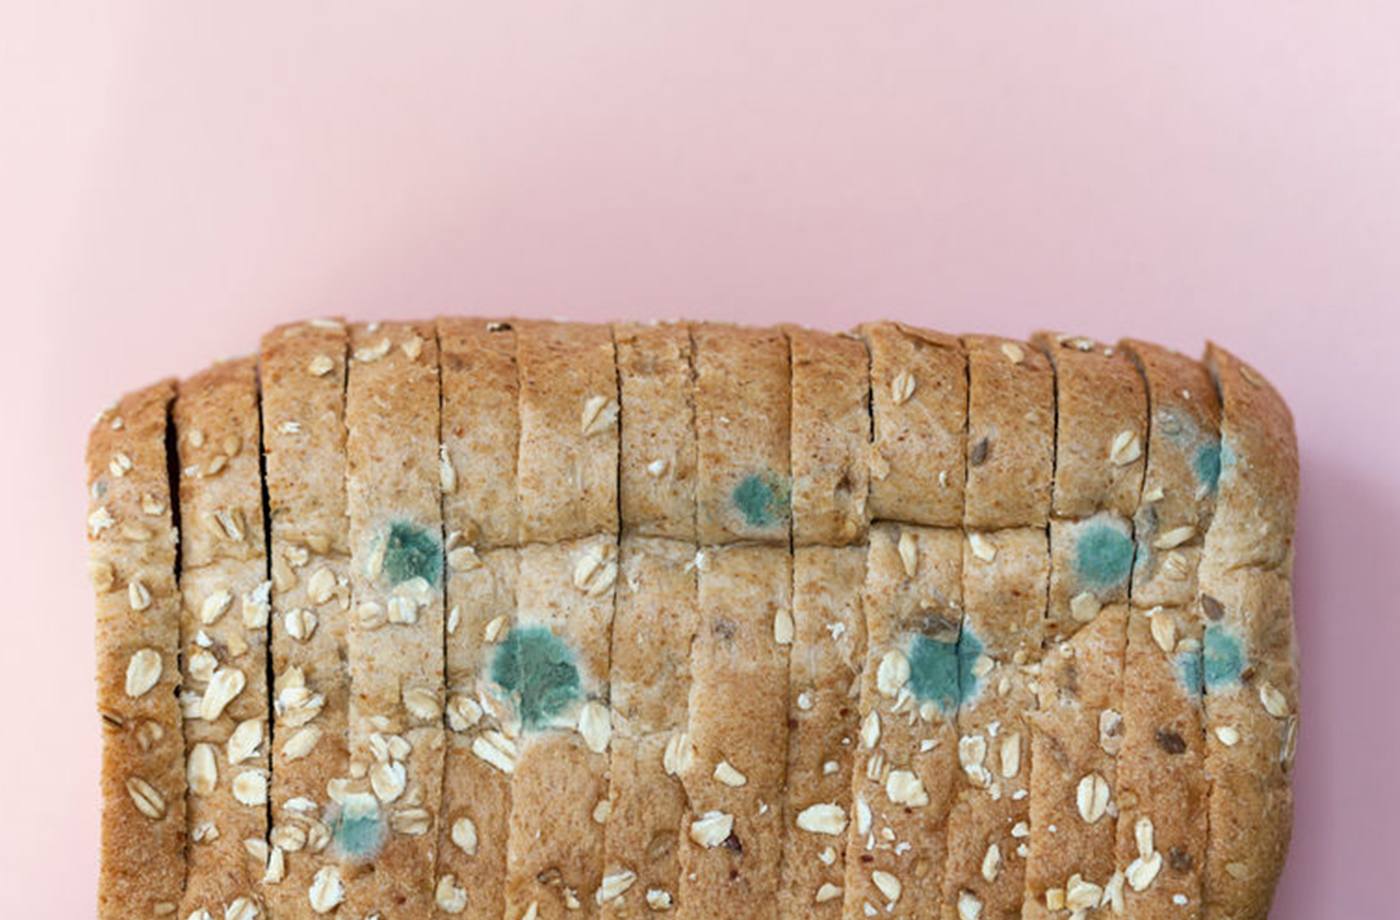 Is It Safe To Eat Moldy Bread?